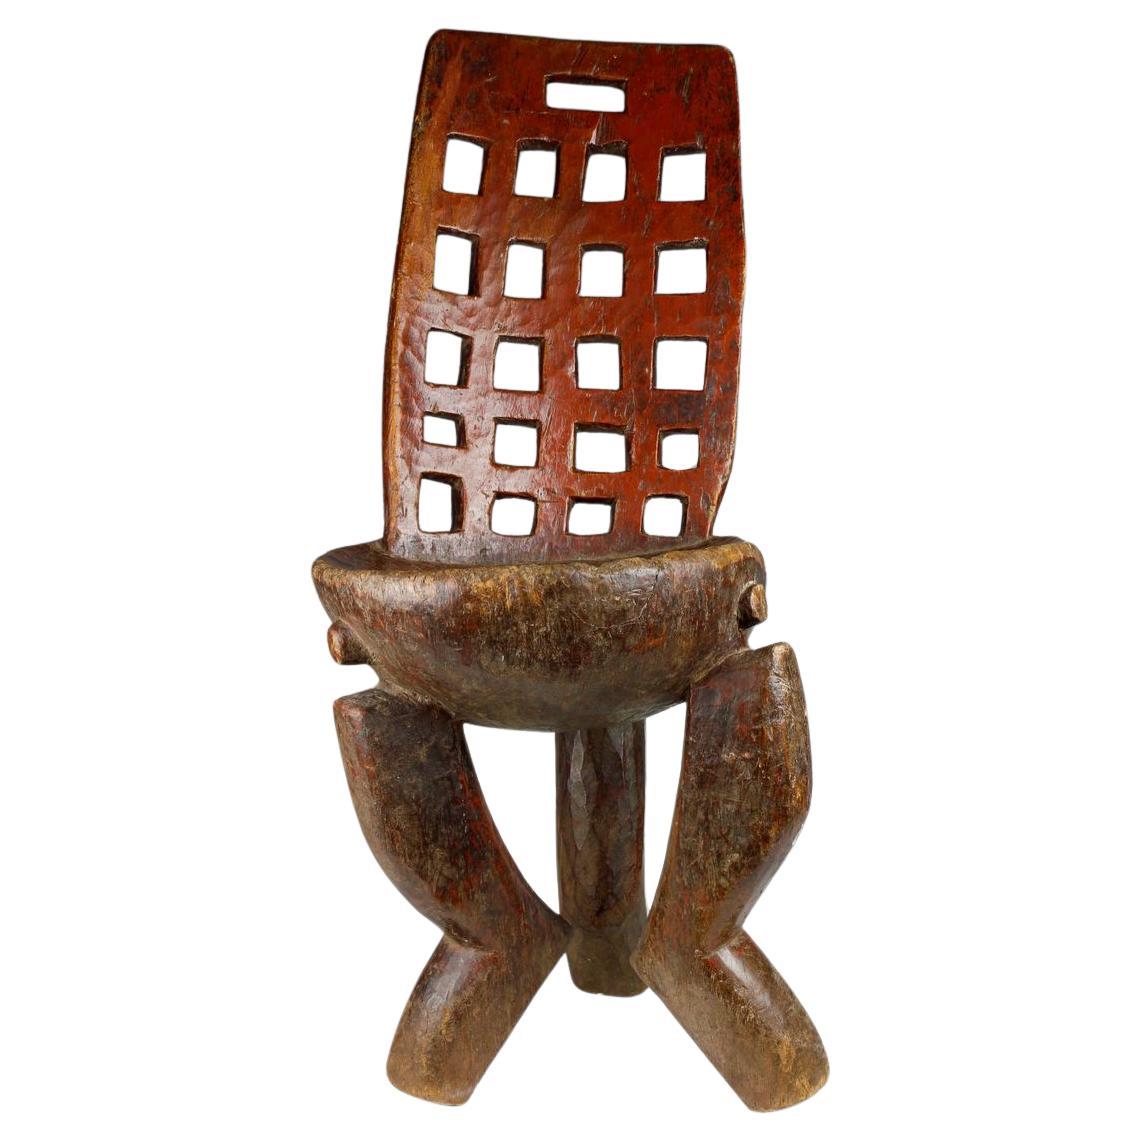 Rare 19th Century High-Backed Ethiopian Chair With Wonderful 'Dancing' Form For Sale